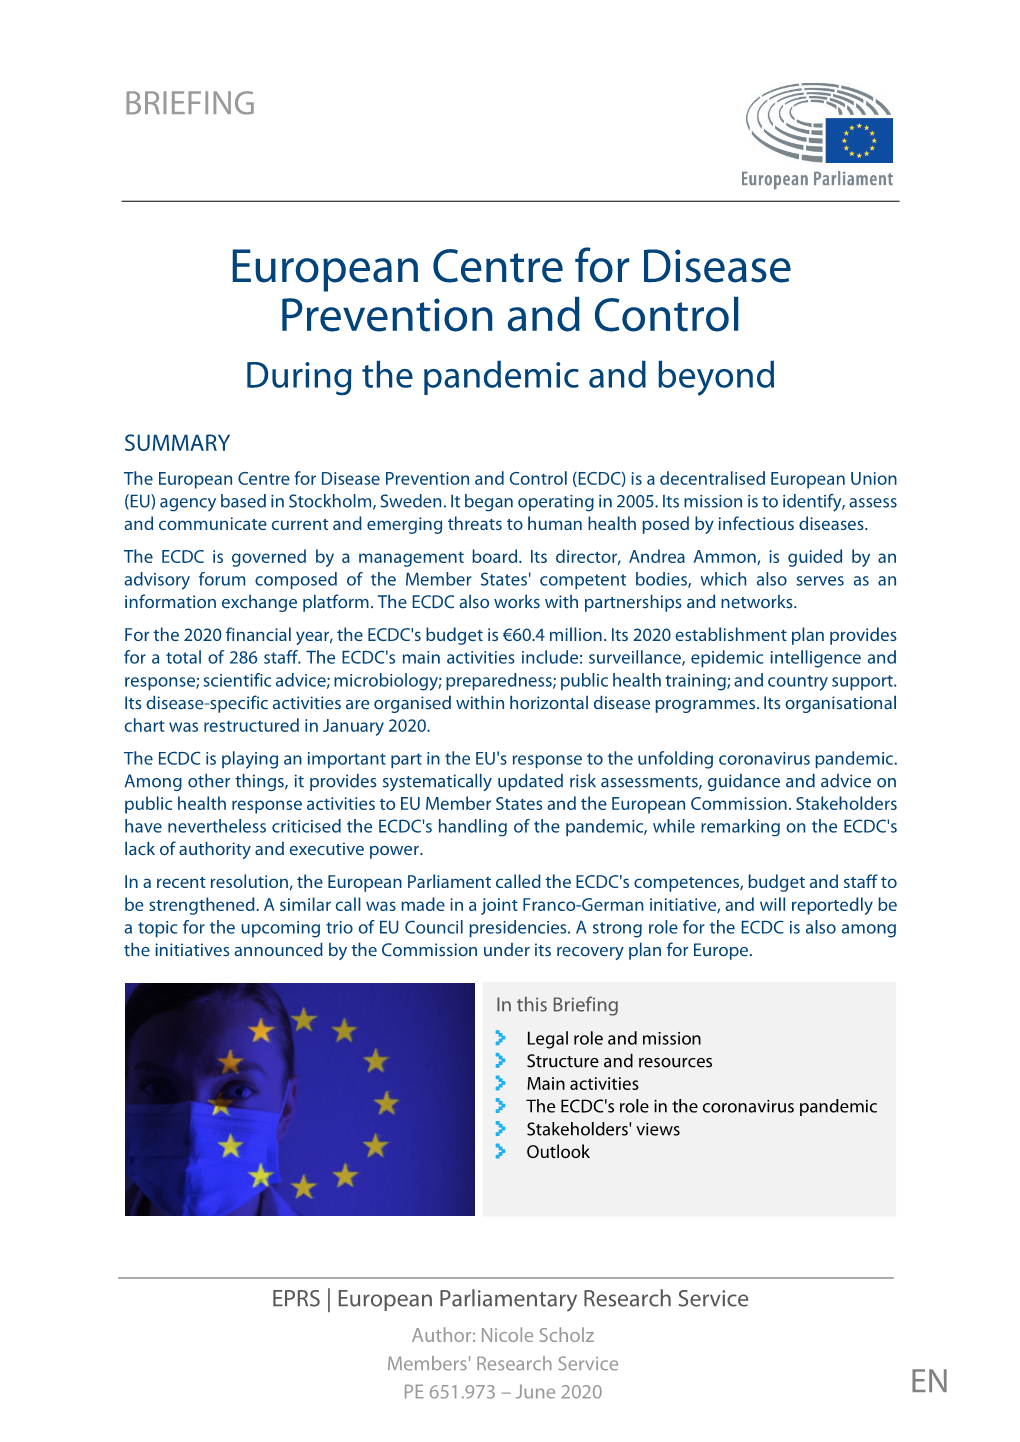 European Centre for Disease Prevention and Control During the Pandemic and Beyond